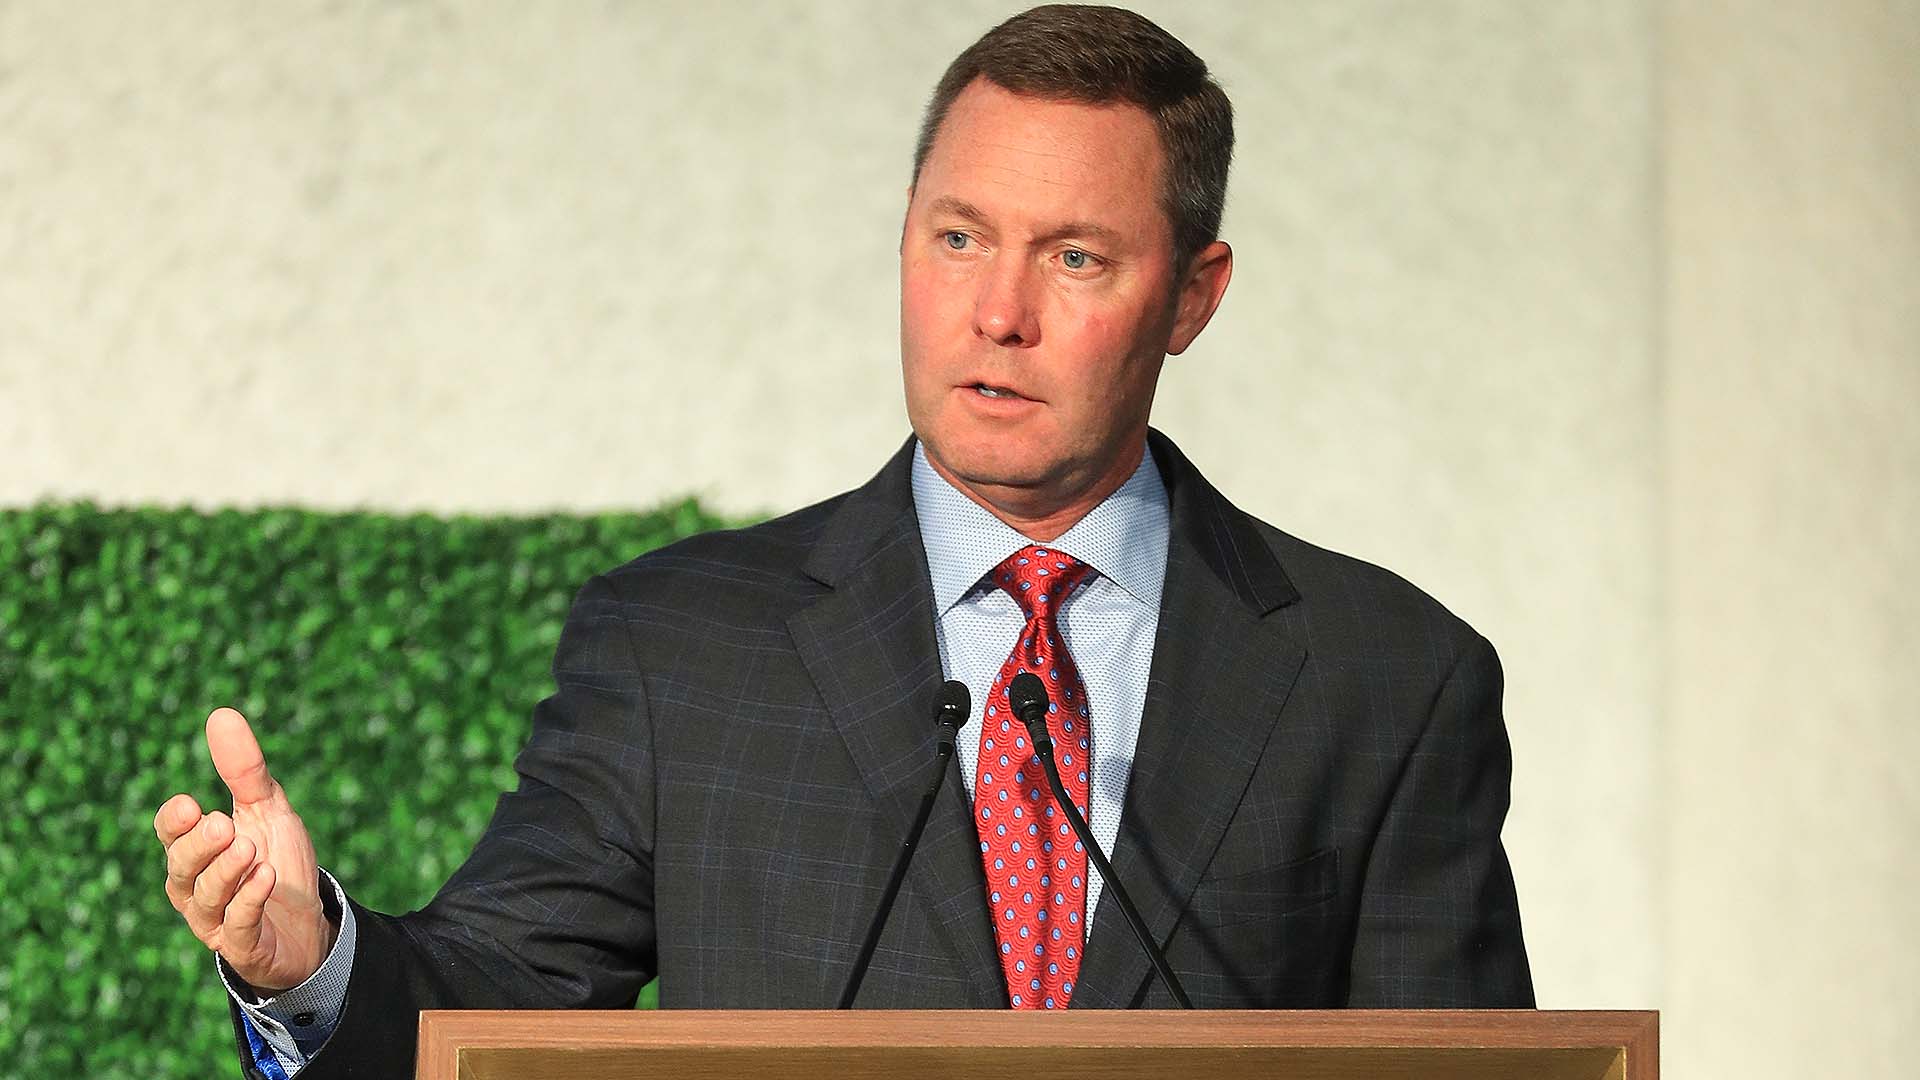 Mike Whan named next USGA CEO, ready to embrace challenges and opportunities